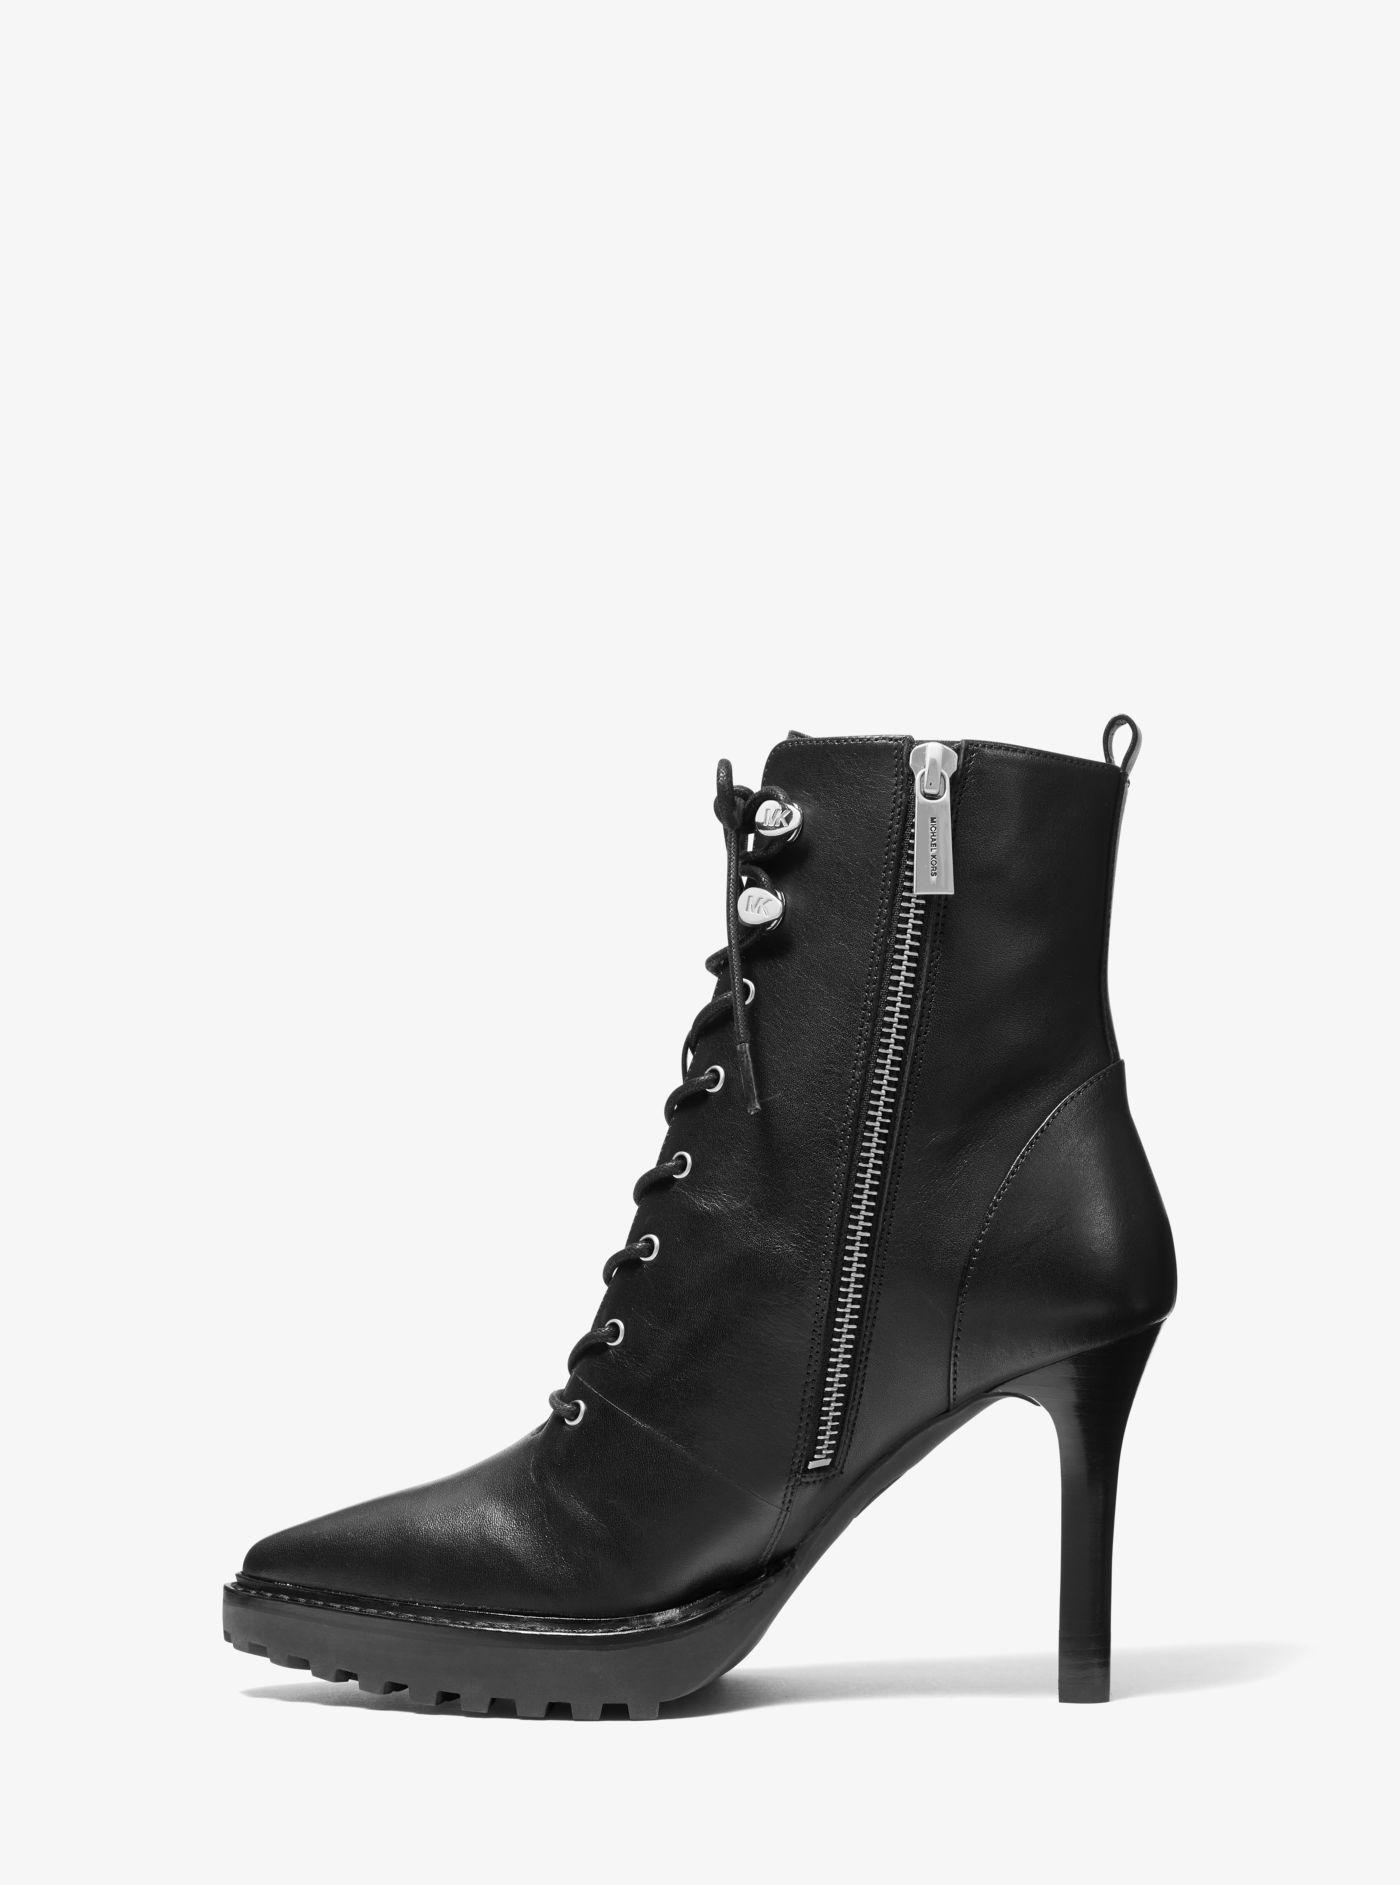 Michael Kors Kyle Leather Lace-up Boot in Black | Lyst